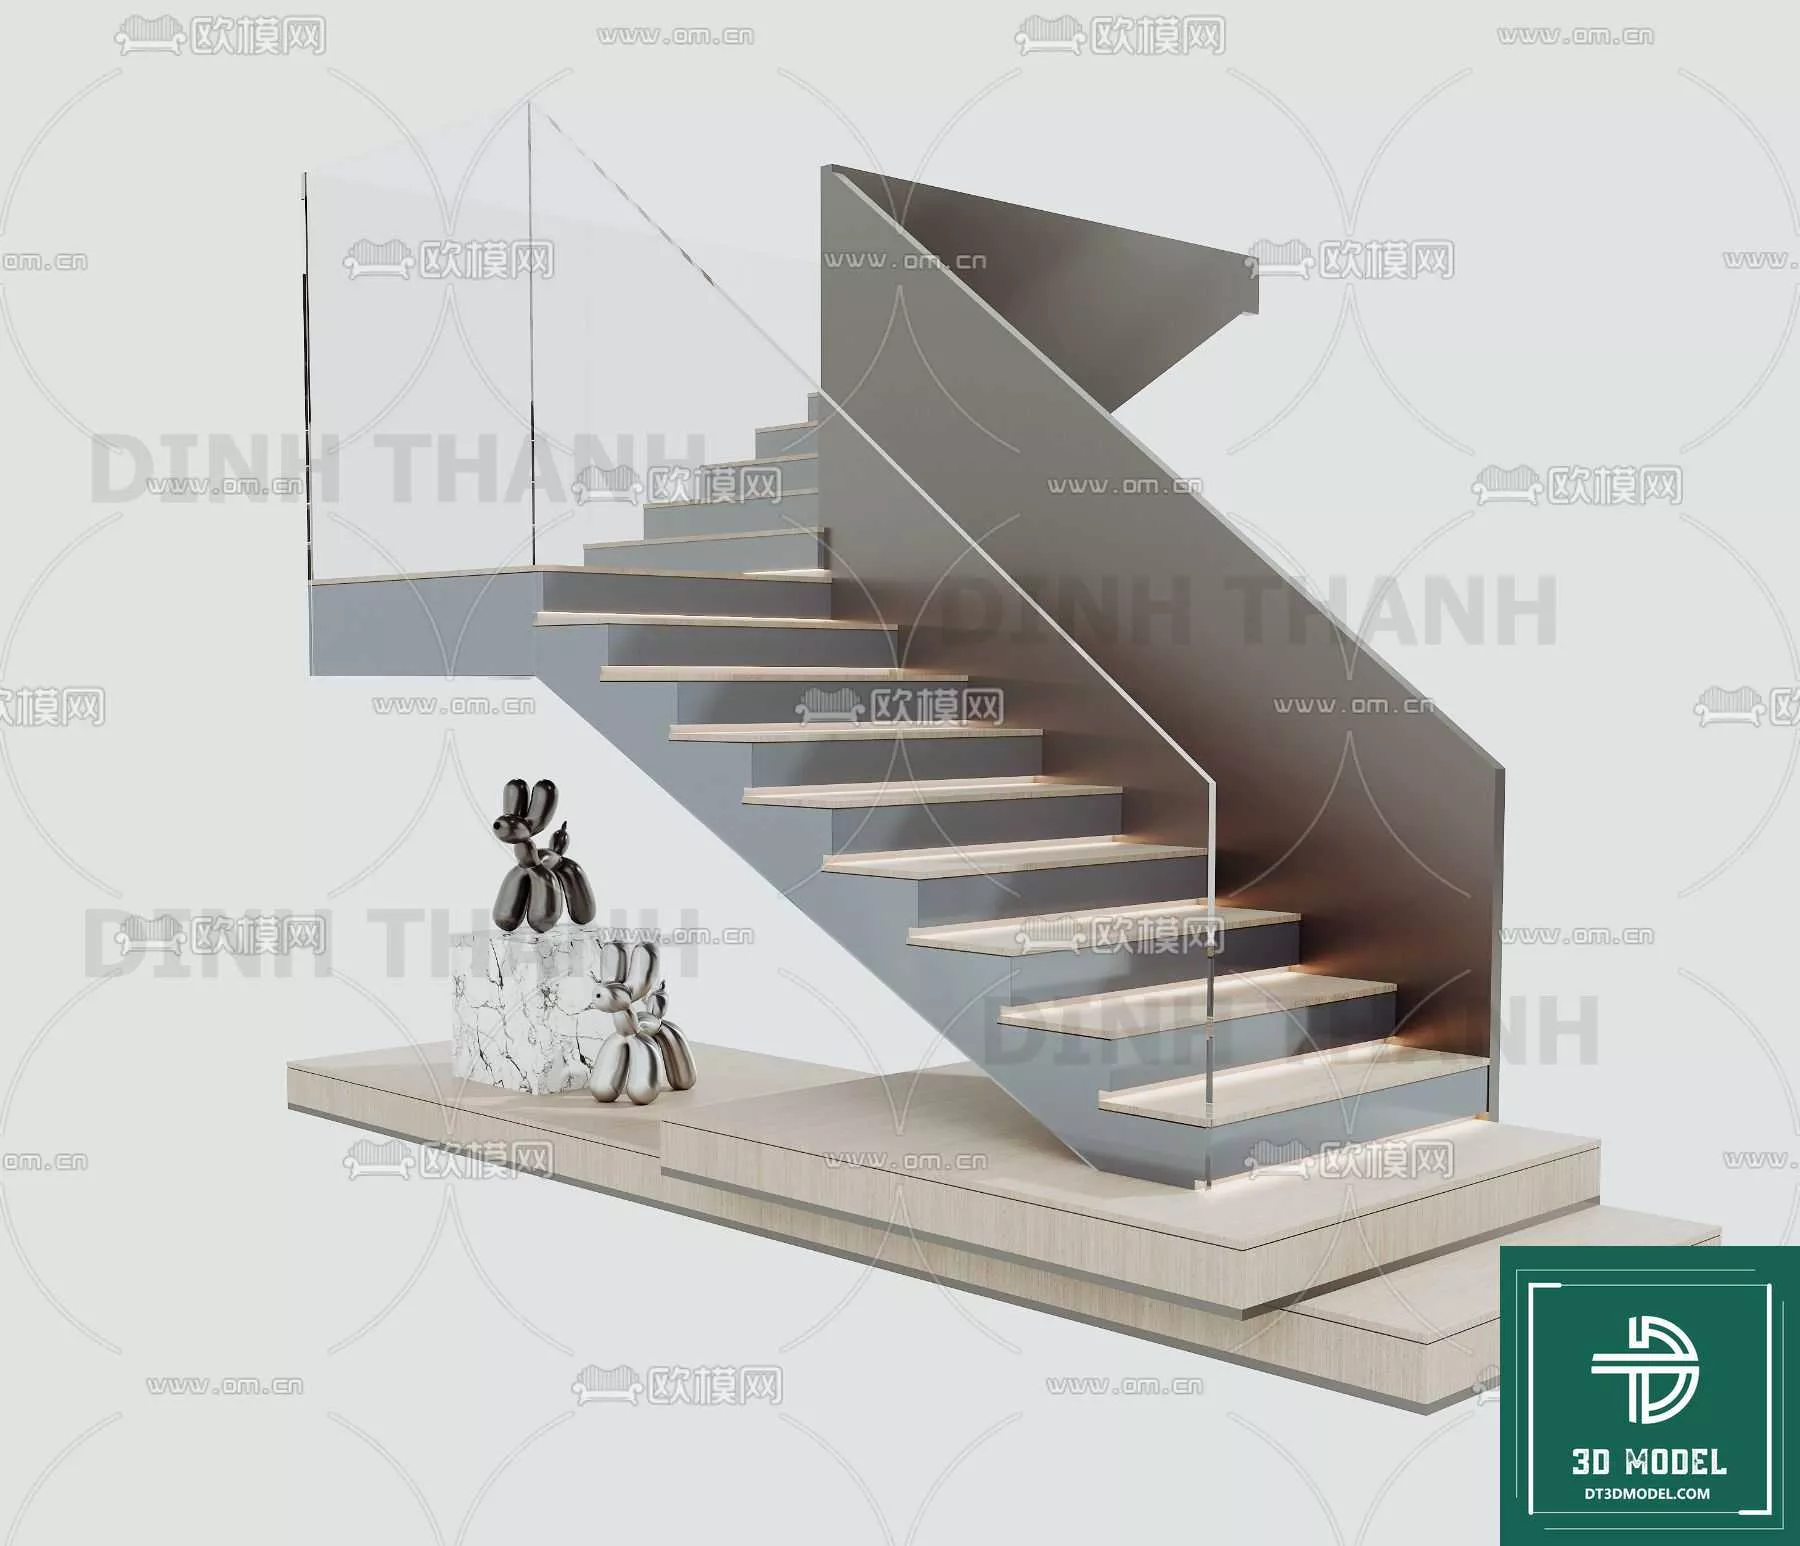 MODERN STAIR - SKETCHUP 3D MODEL - VRAY OR ENSCAPE - ID14295